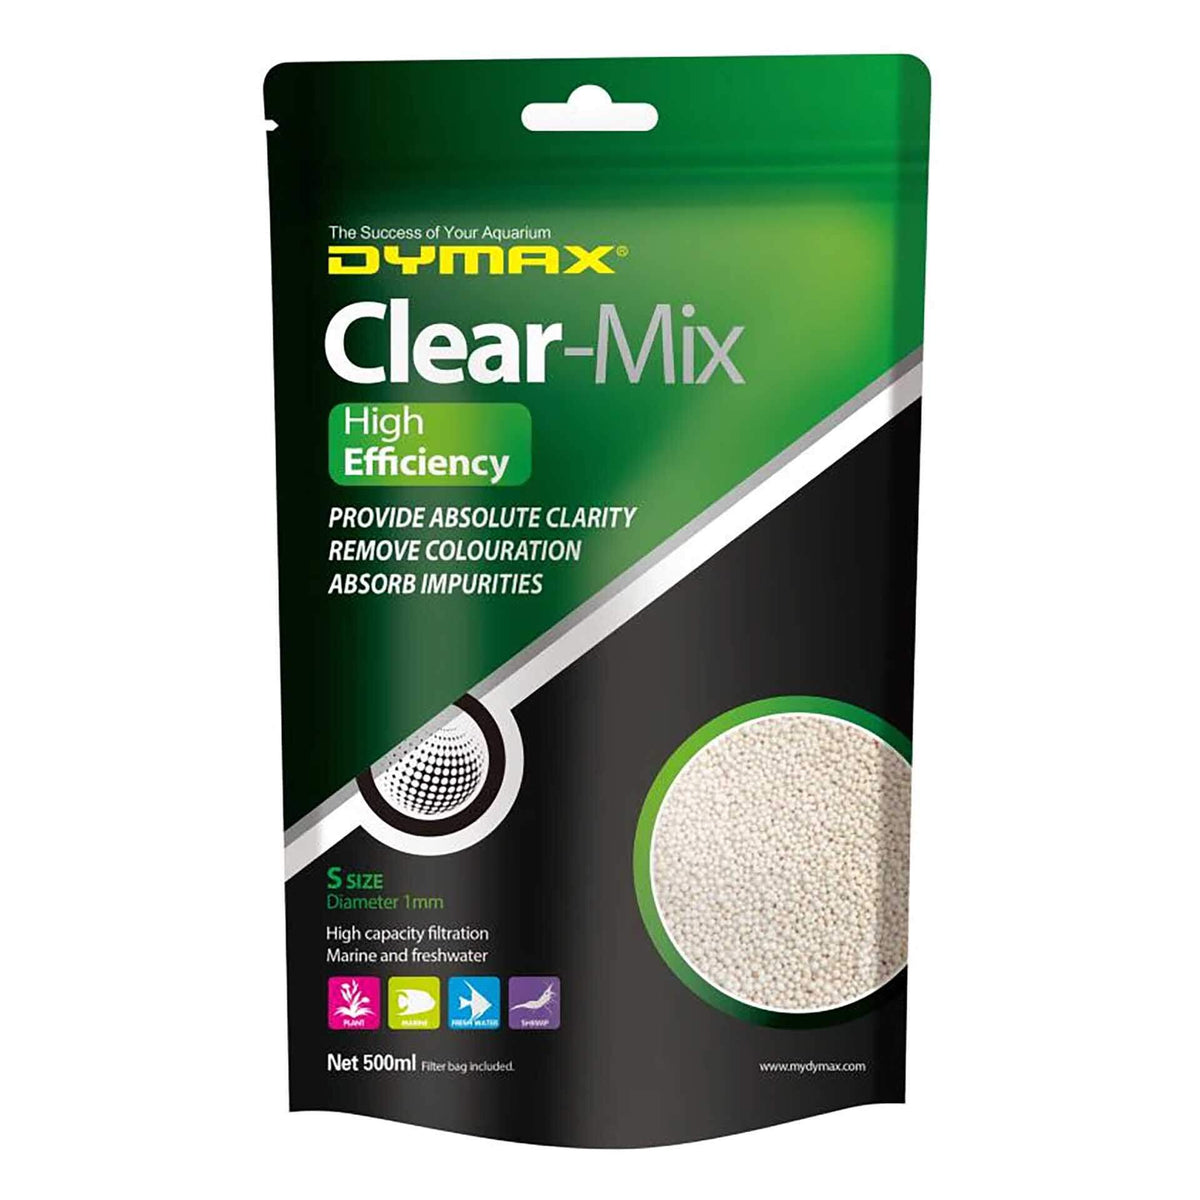 Dymax Clear-Max 500ml - Provides Clarity and Removes Colouration